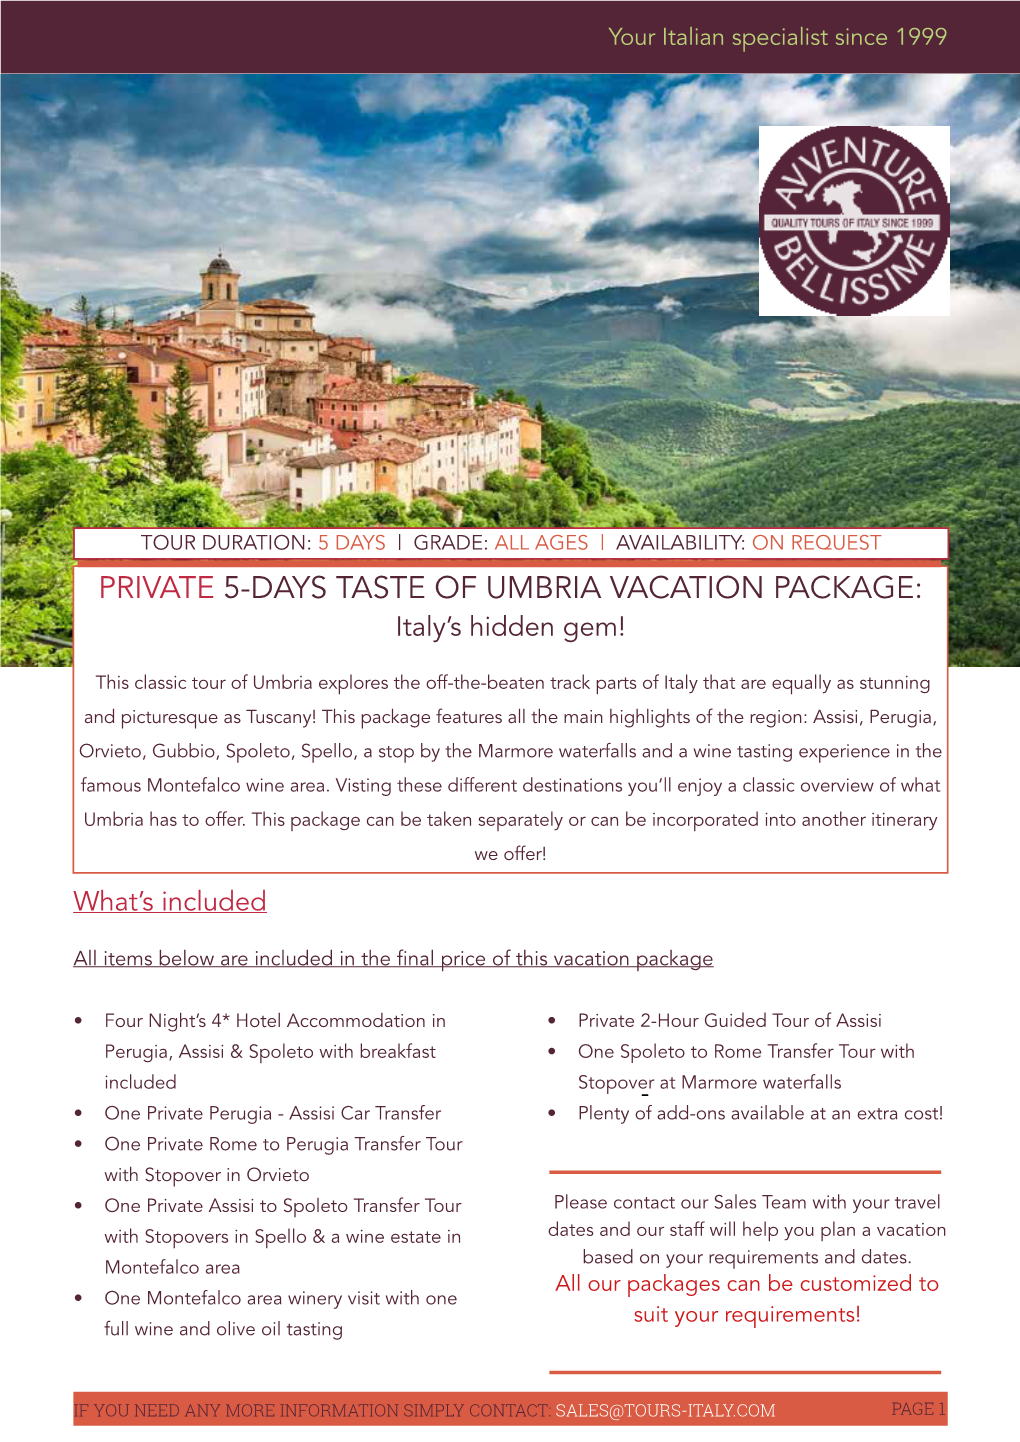 PRIVATE 5-DAYS TASTE of UMBRIA VACATION PACKAGE: Italy’S Hidden Gem!